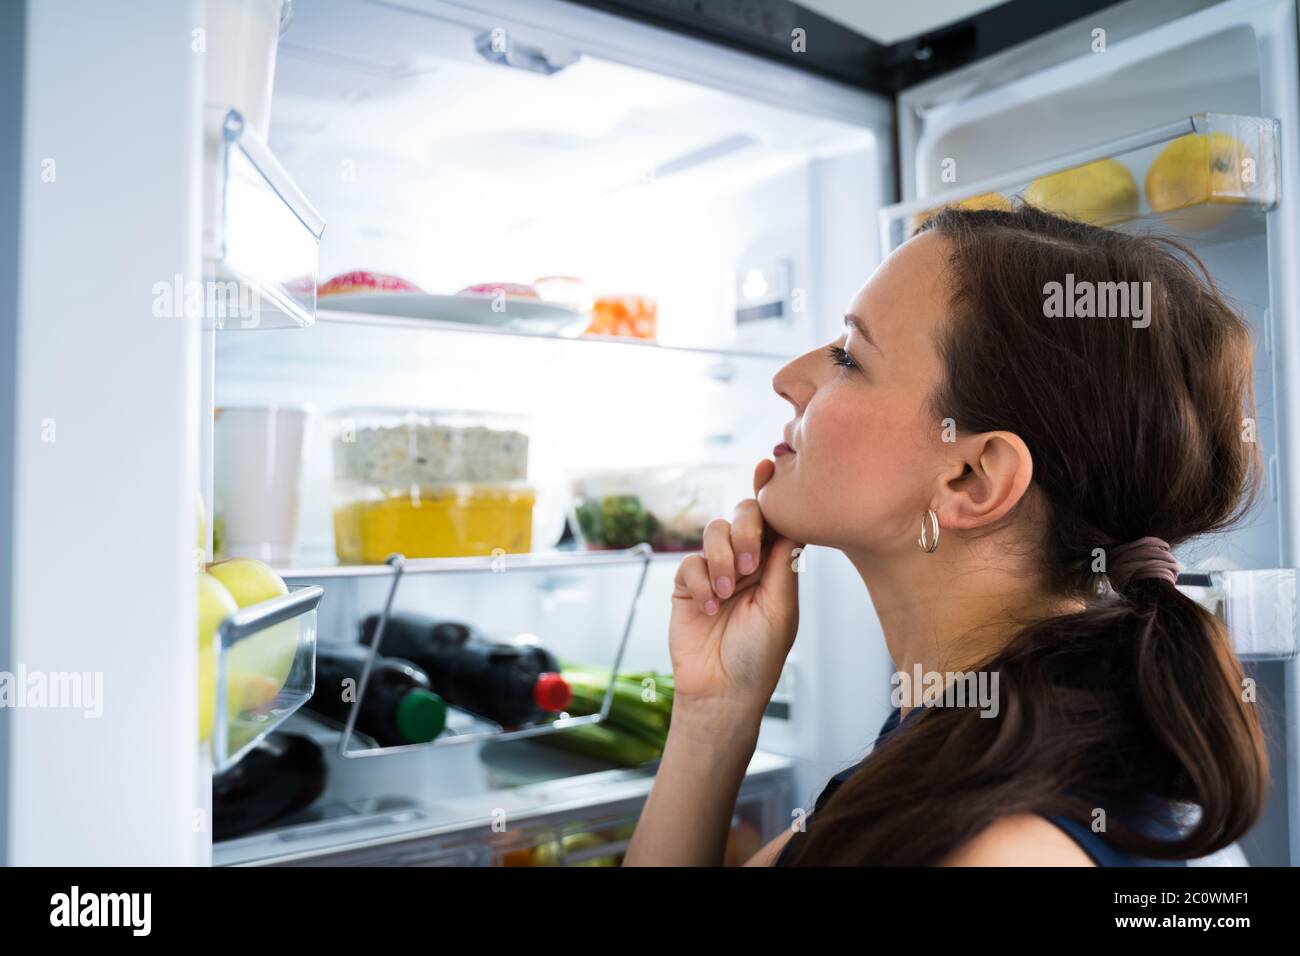 Hungry Woman Looking For Food In Kitchen At Home Stock Photo